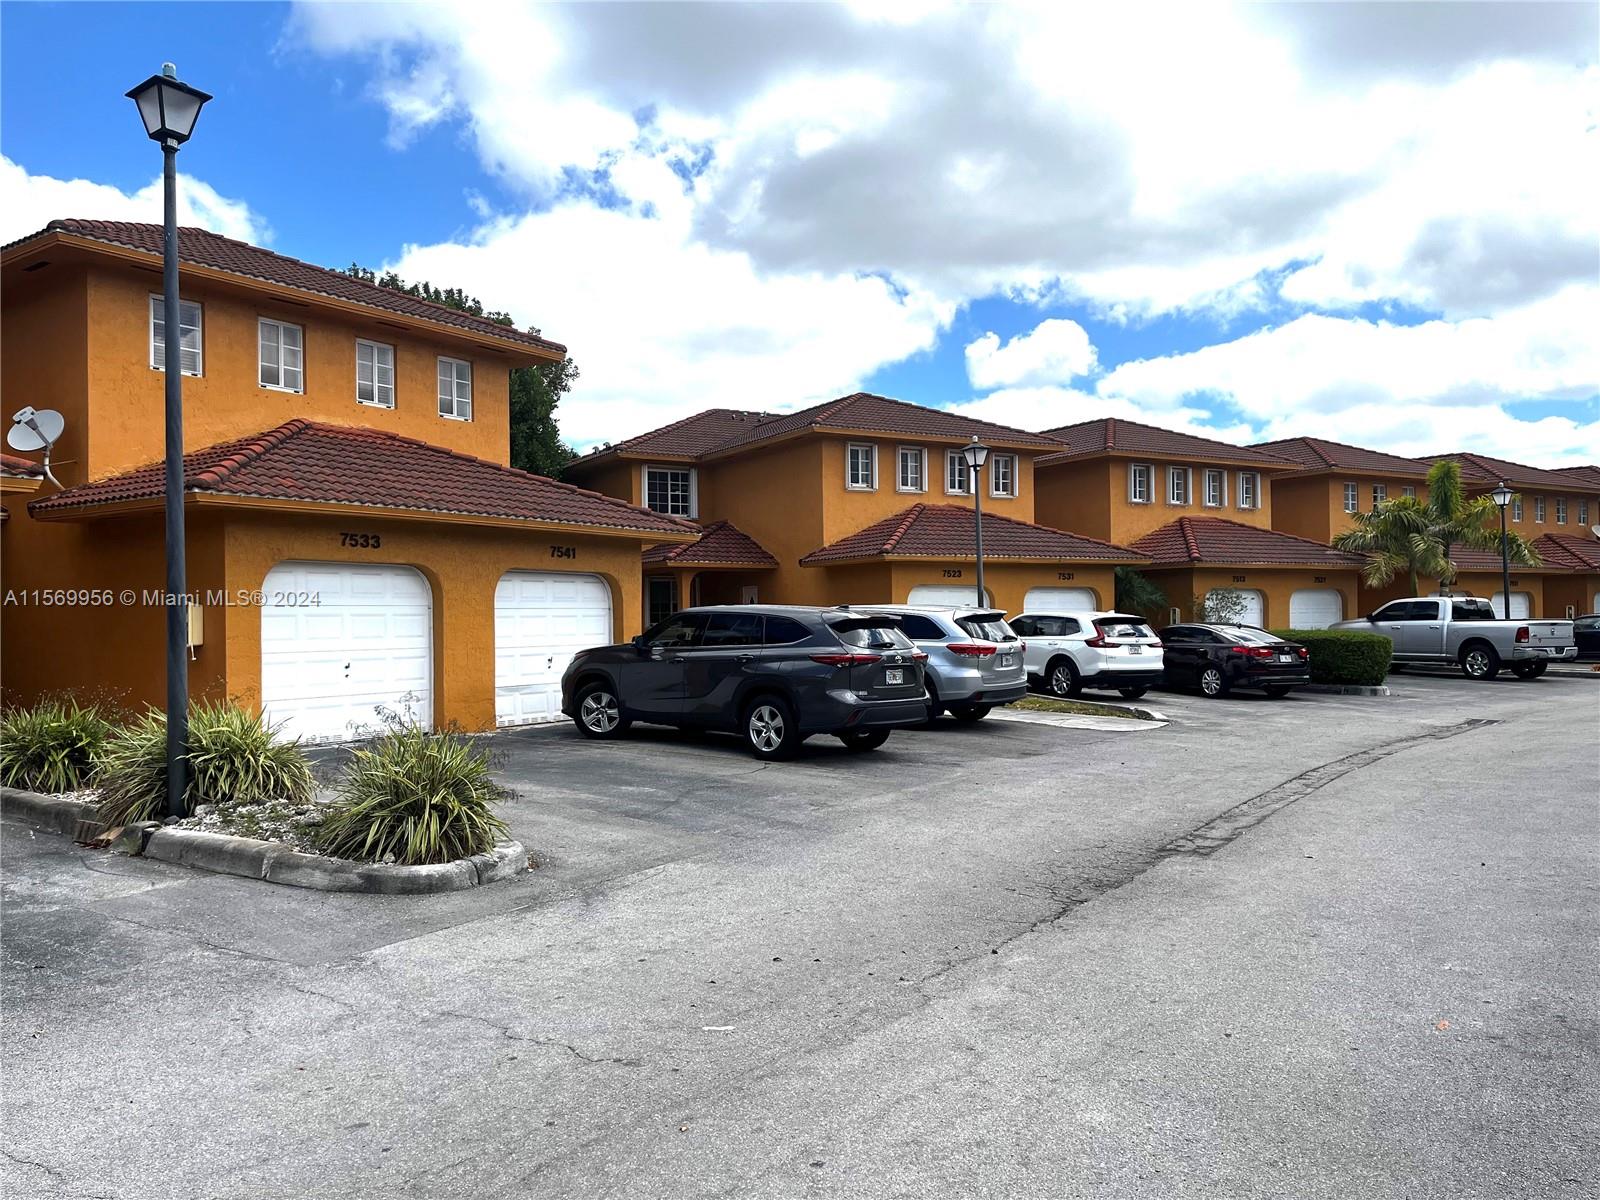 Property for Sale at 7533 Nw 176th Ter 7533, Hialeah, Miami-Dade County, Florida - Bedrooms: 3 
Bathrooms: 2  - $390,000